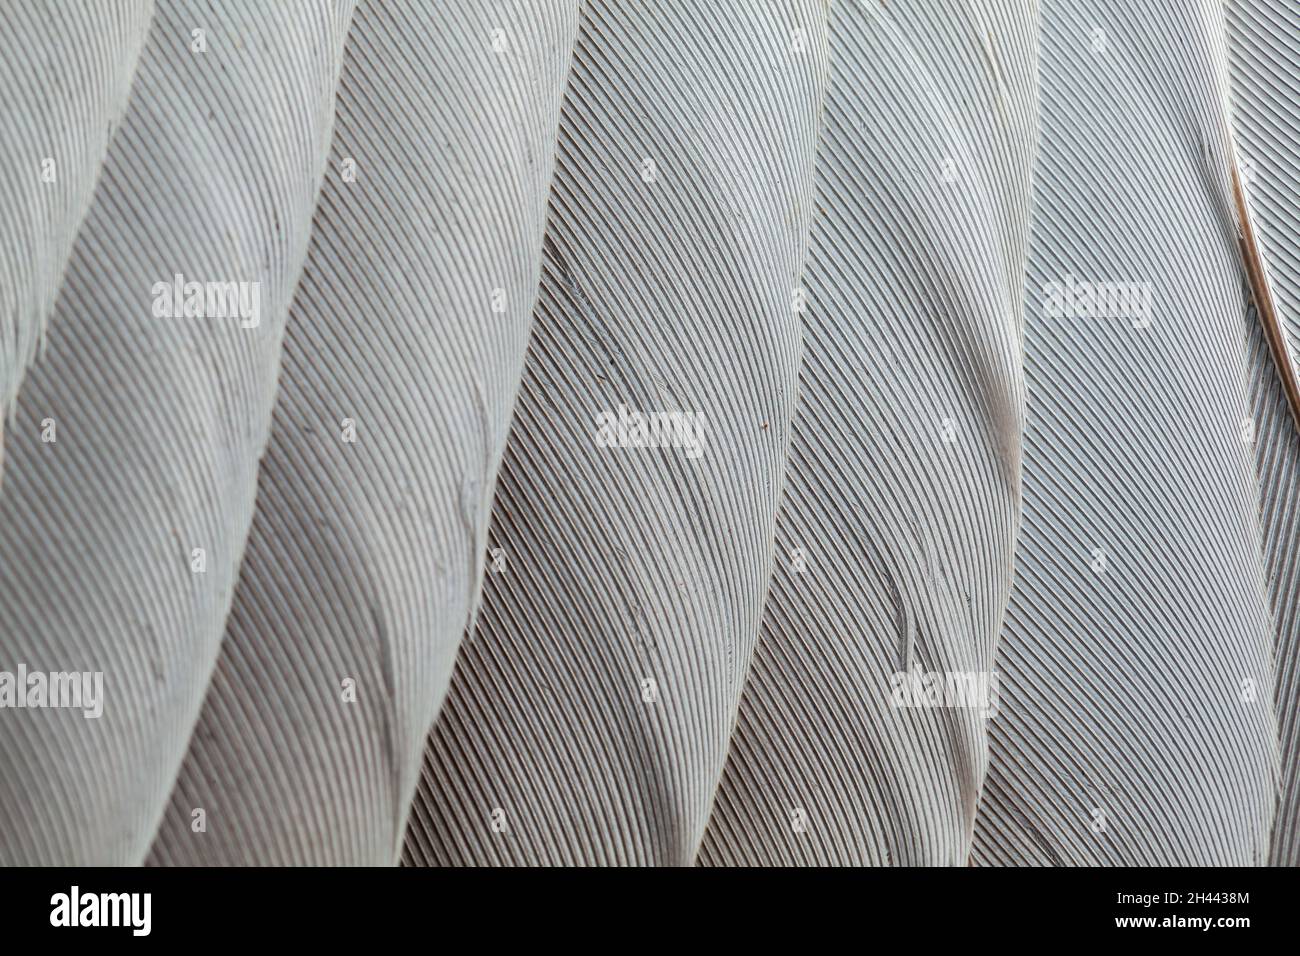 Feather pattern in high magnification closeup Stock Photo